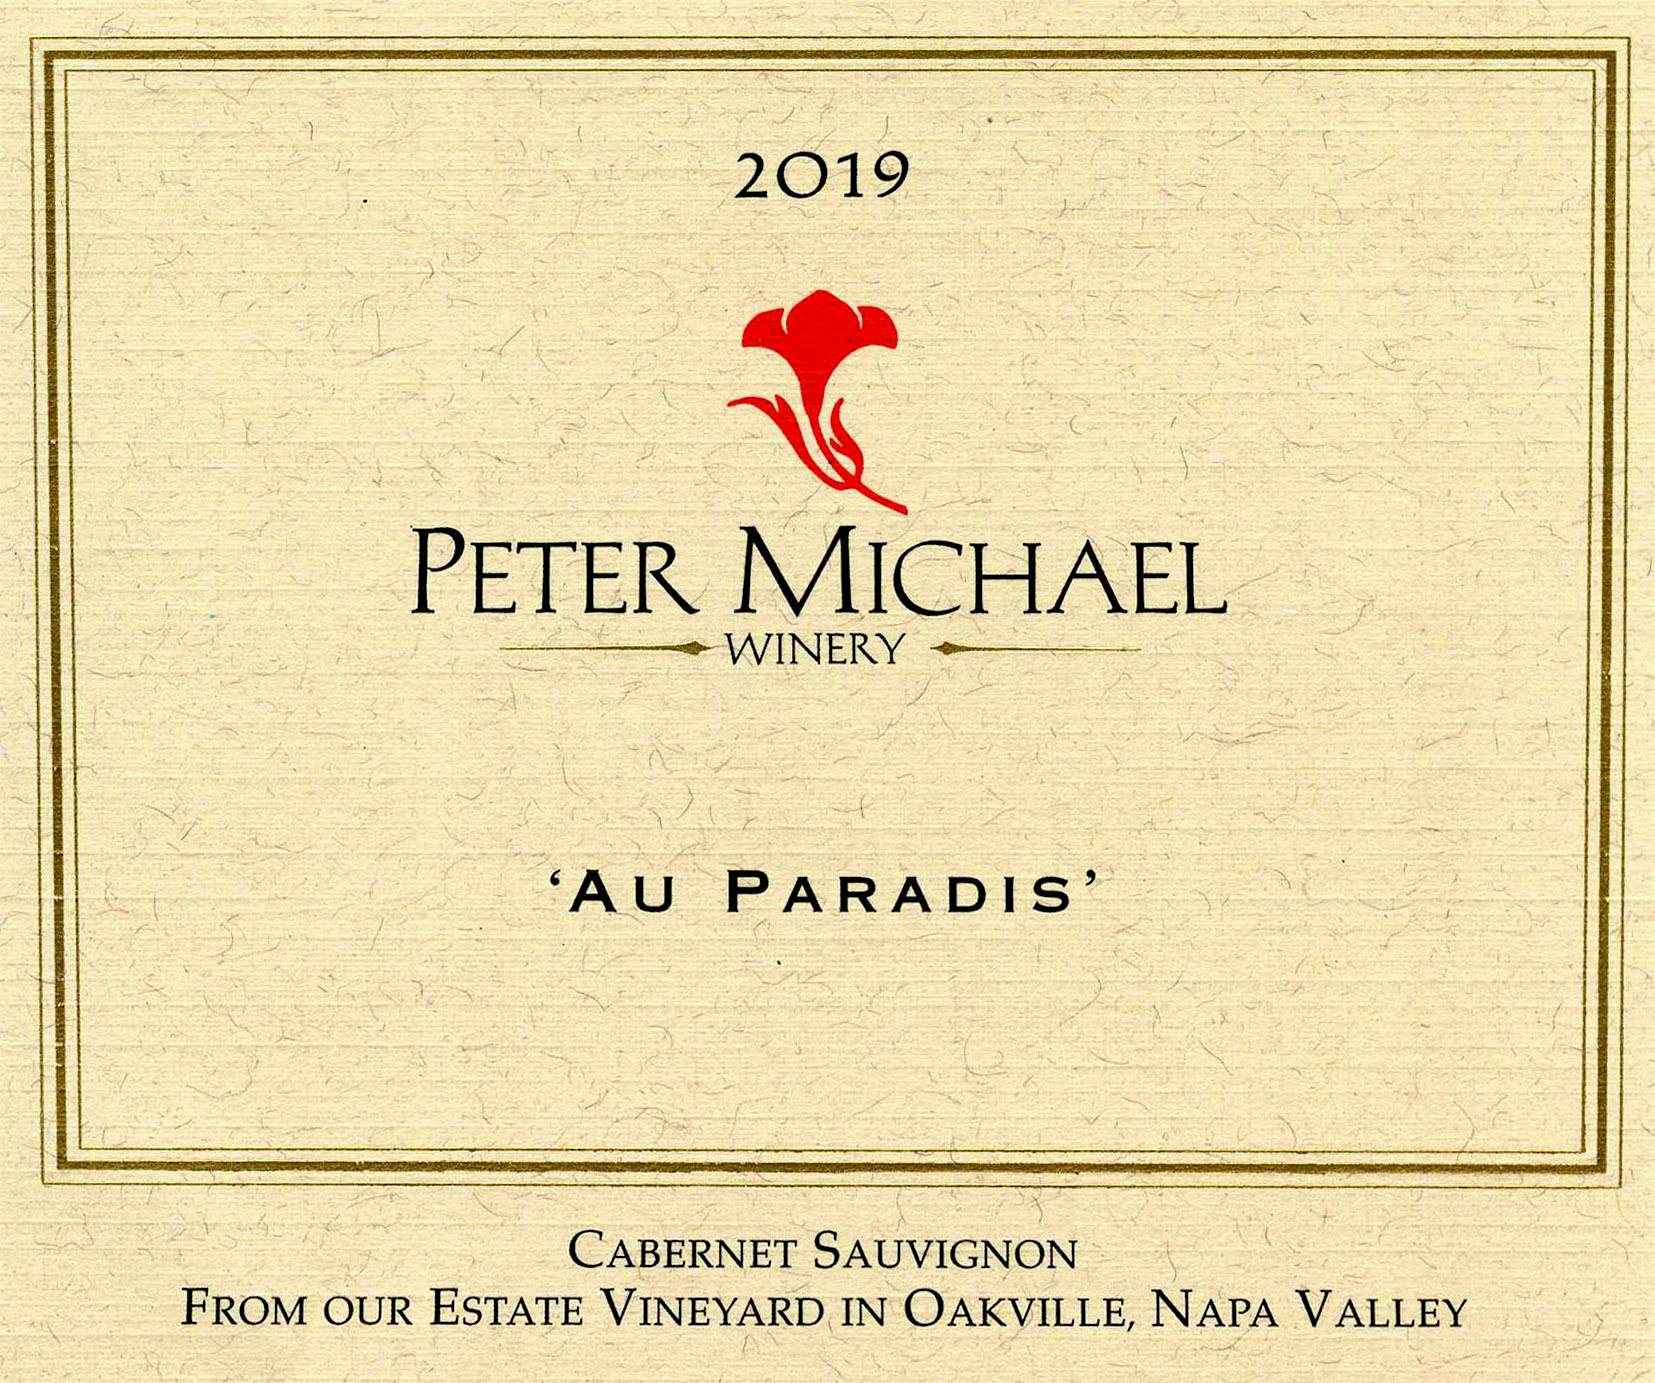 Label for Peter Michael